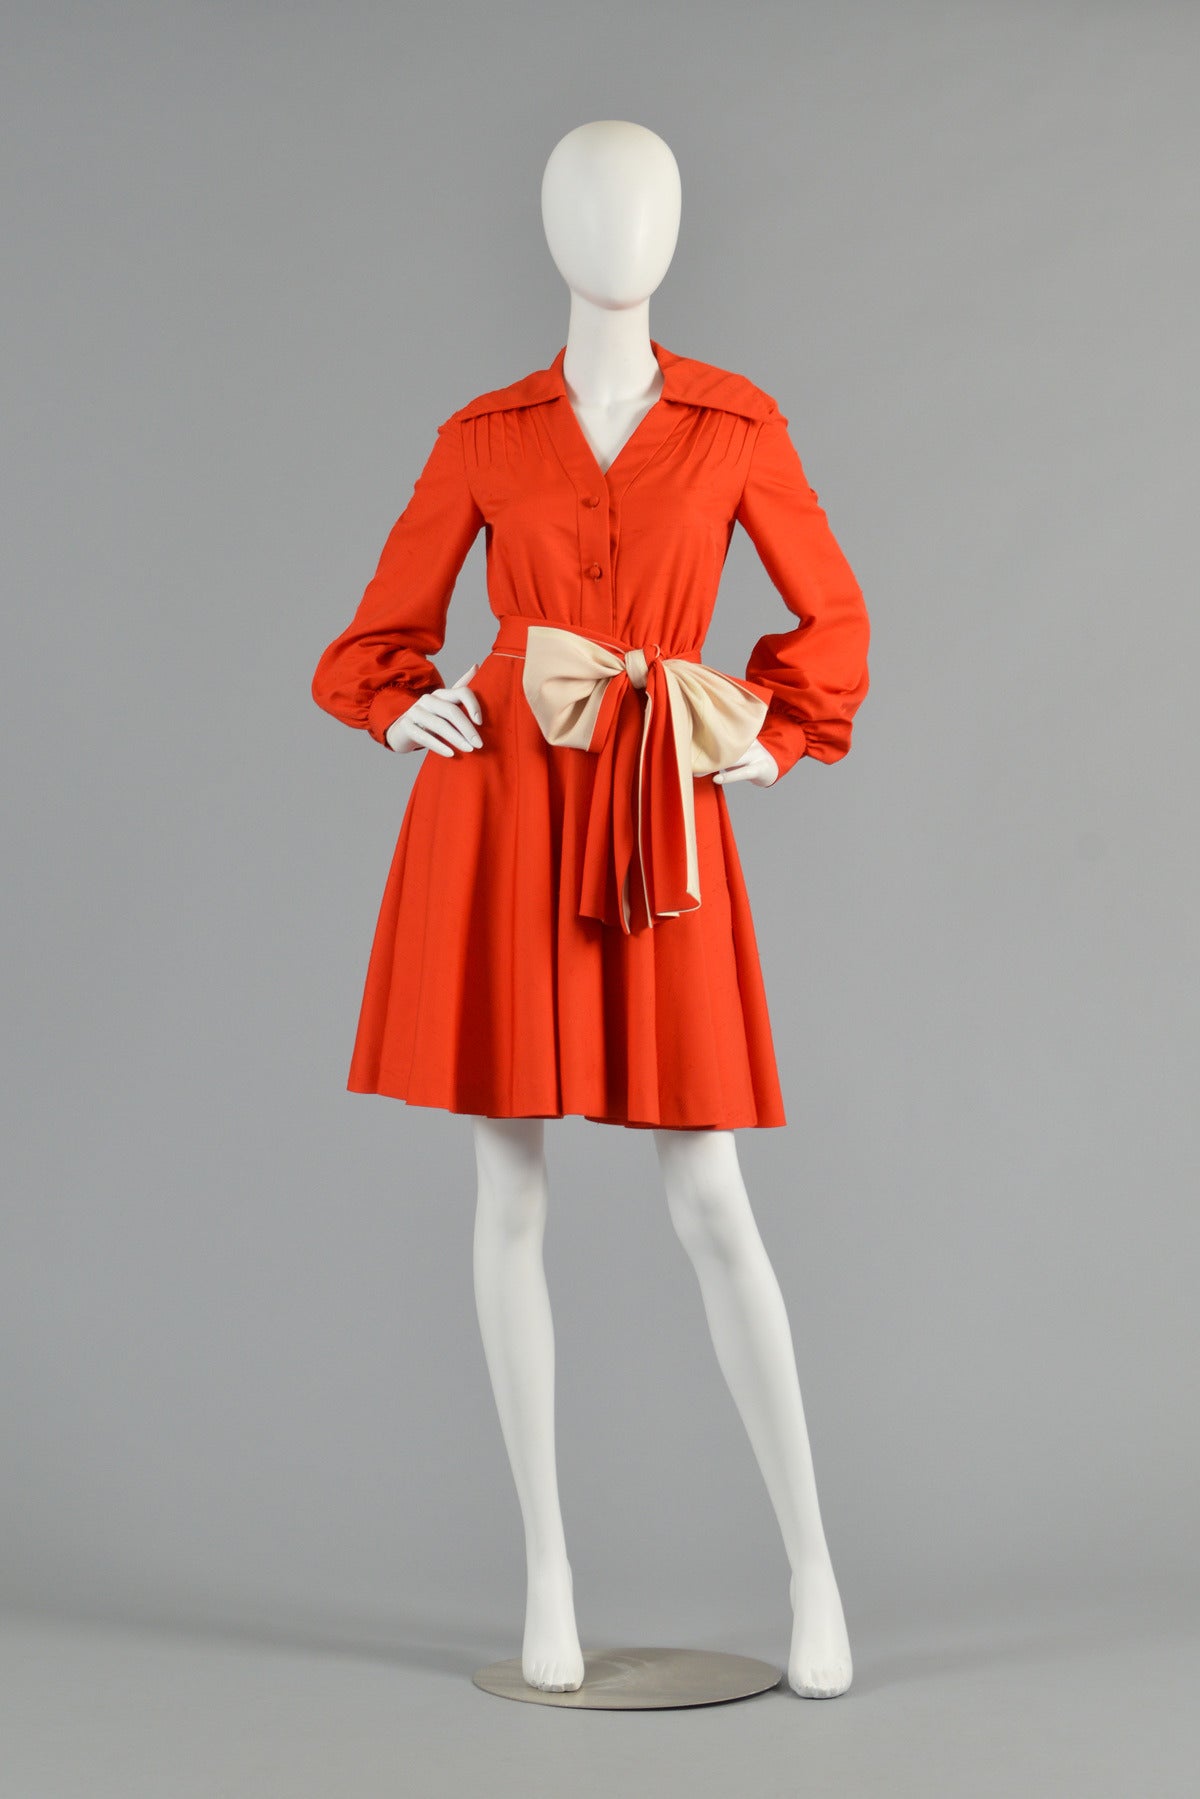 Adorable 1970s poppy colored raw slubbed silk dress by Geoffrey Beene. Such a great find! Bodice is super fitted with button front, v-neck and oversize flat collar. We absolutely love the pin-tucked details at the shoulder and the long bishop